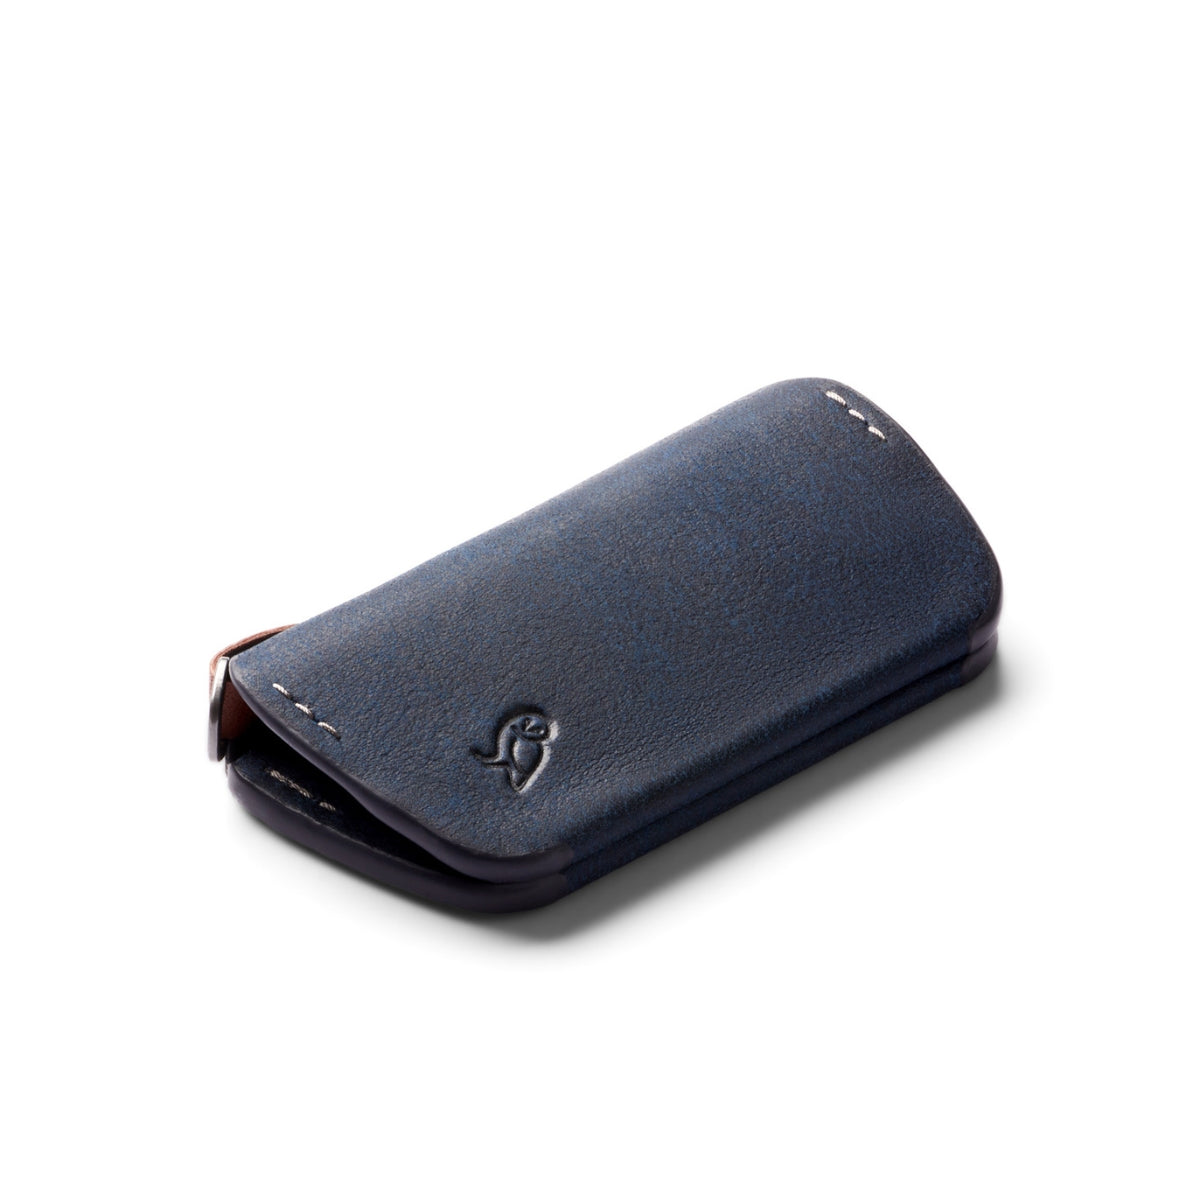 Bellroy Key Cover (Third Edition) in Ocean